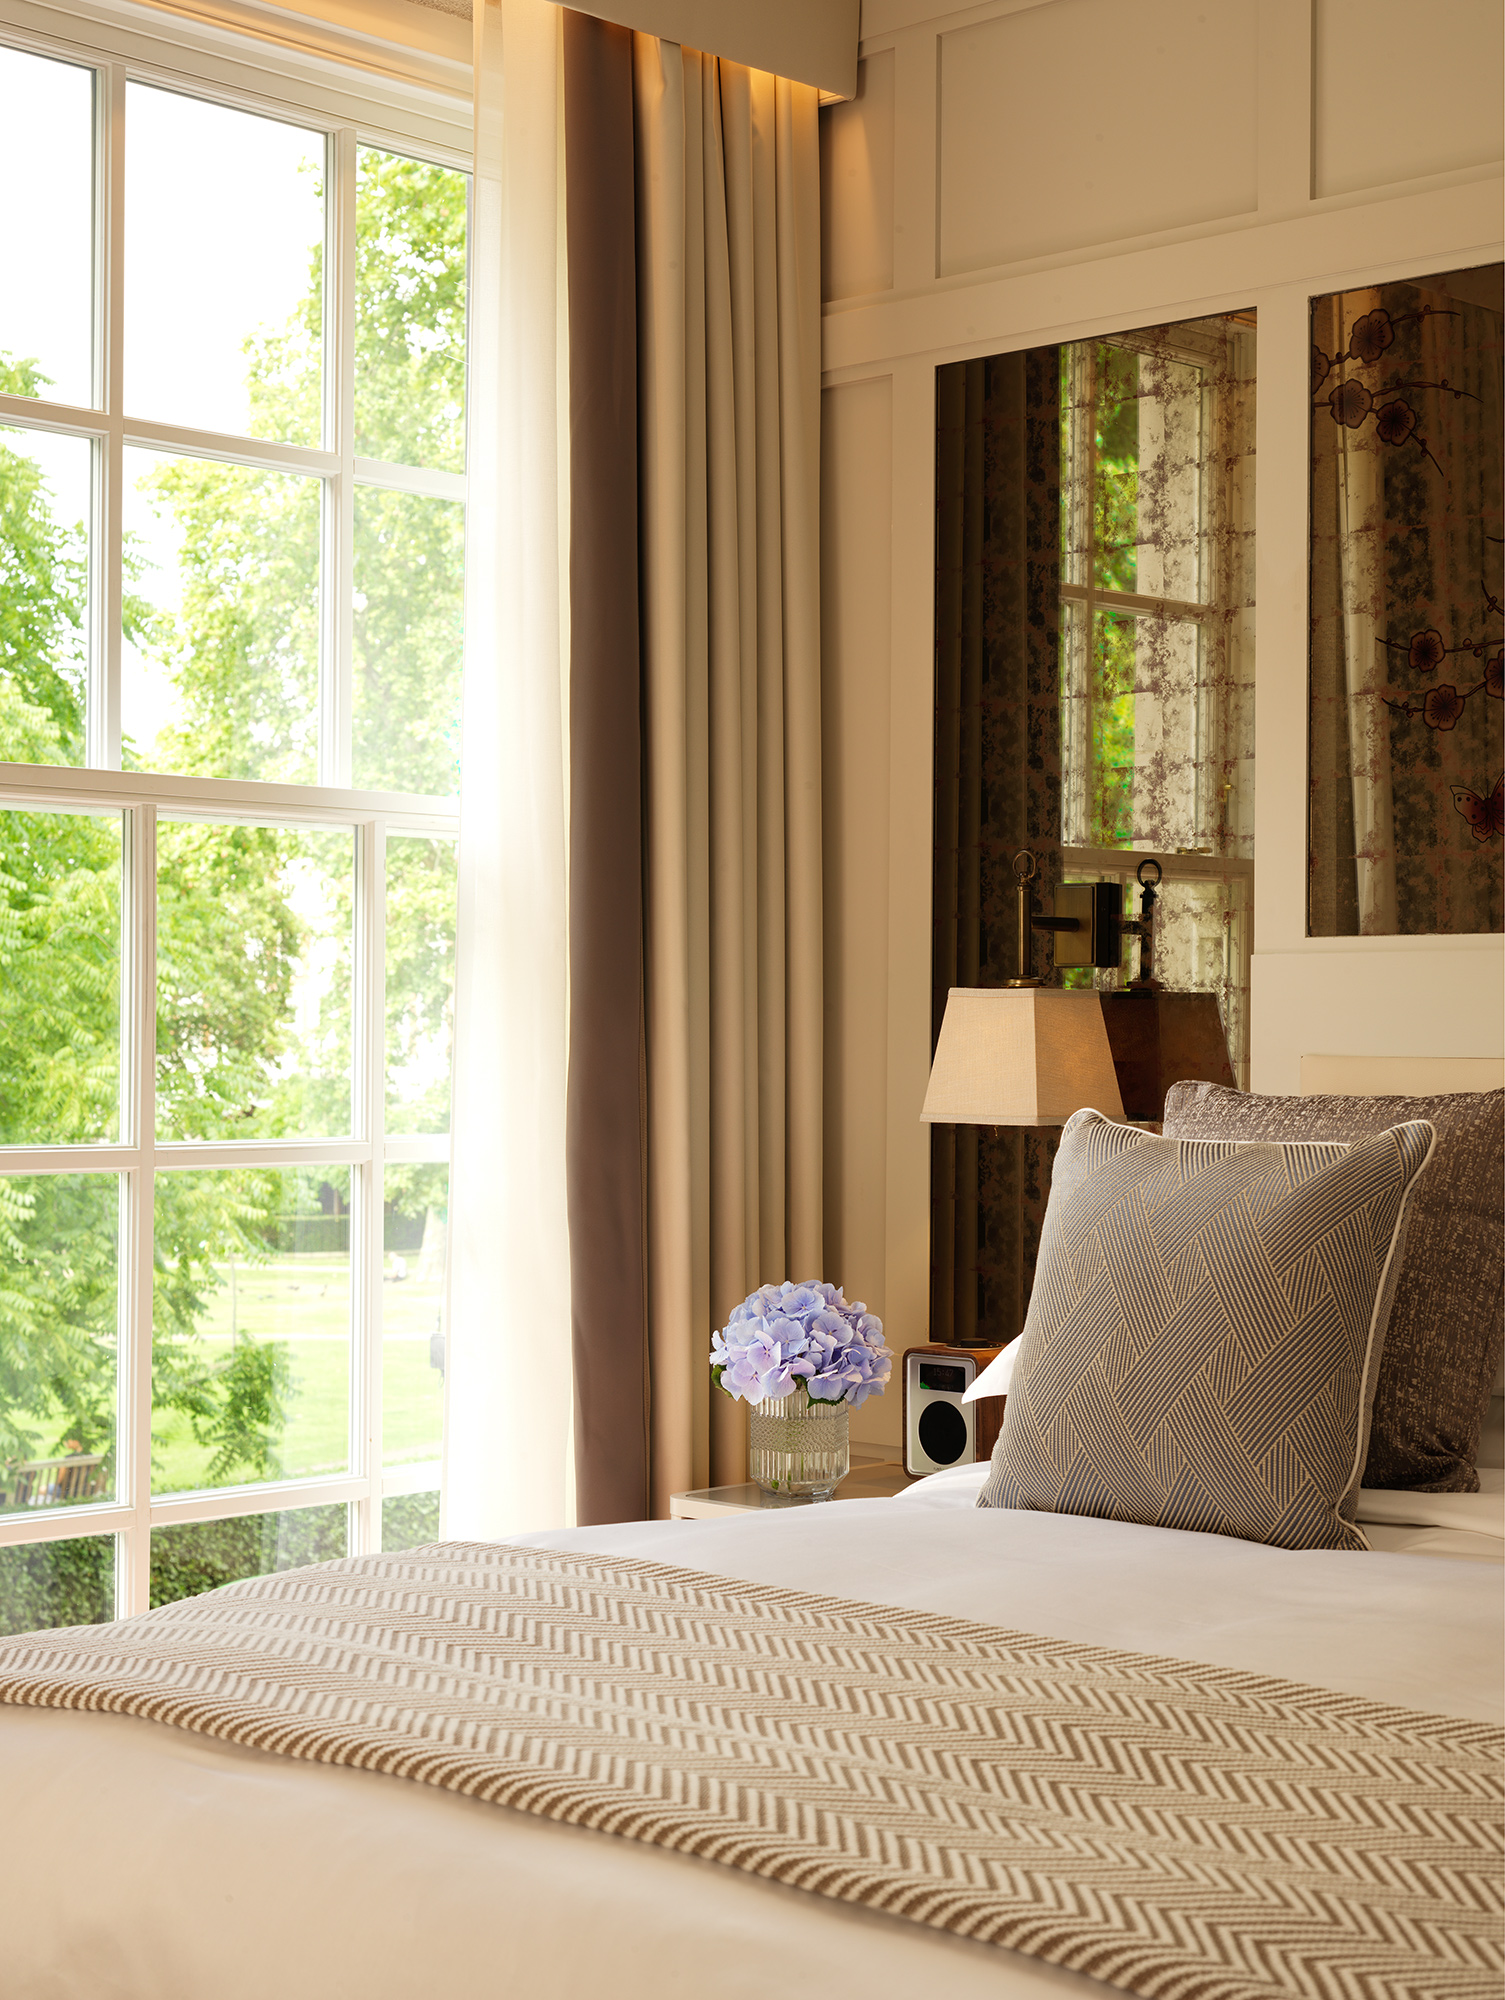 Reserve a room at The Biltmore with a striking view over Grosvenor Square